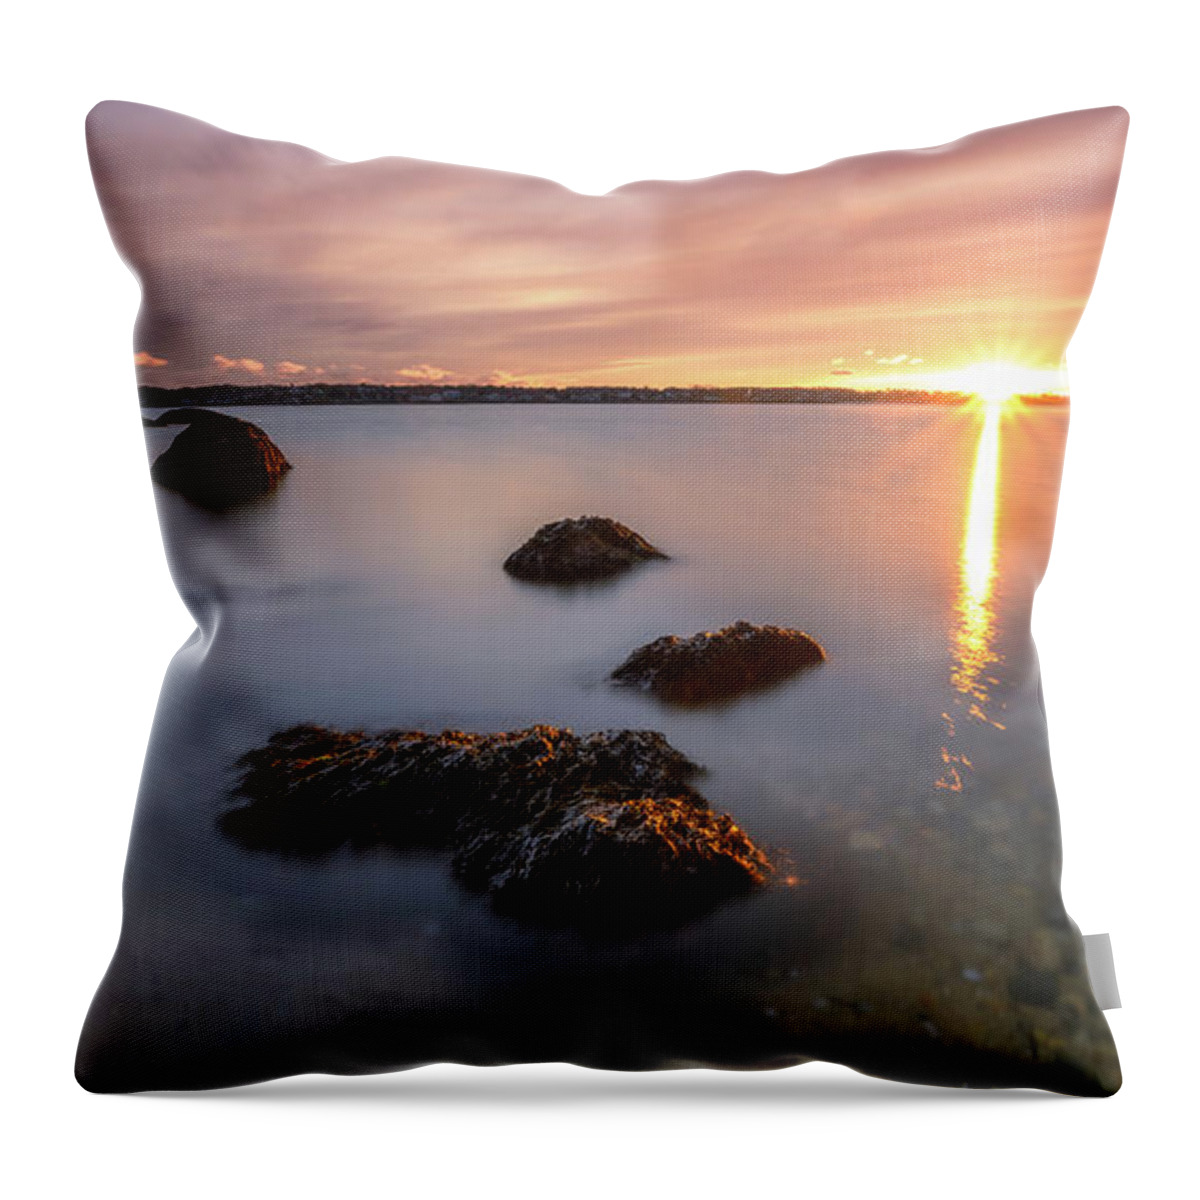 Sunrise Throw Pillow featuring the photograph Morning Sun, Stage Fort Park by Michael Hubley